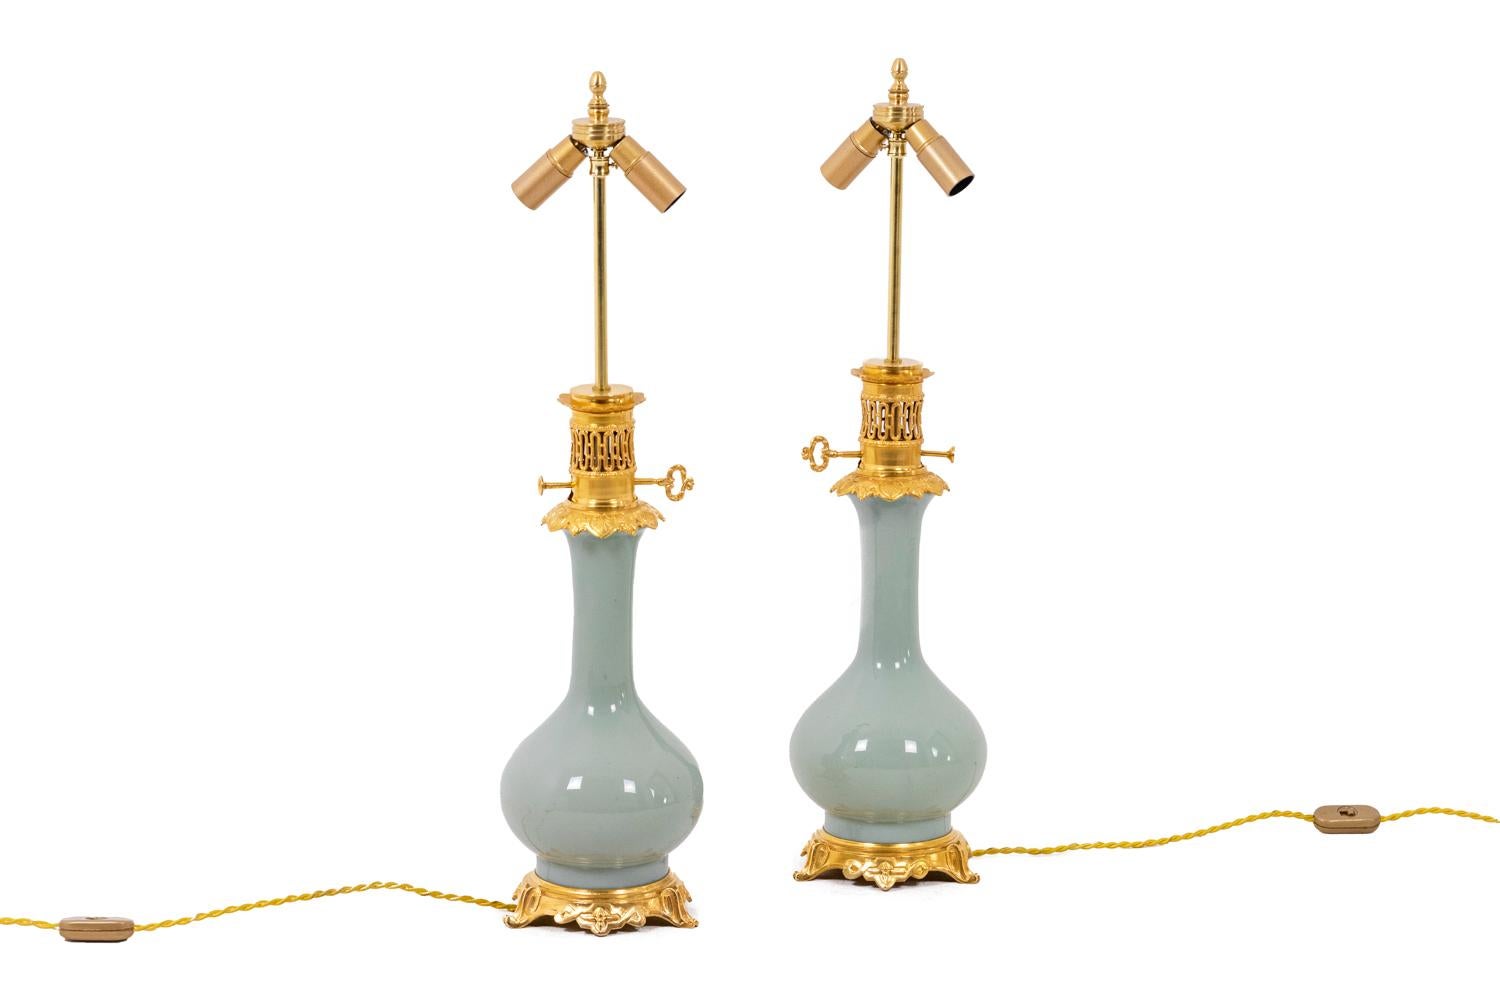 Pair of lamps in celadon porcelain and gilt bronze, plain color. Frame in gilded bronze. Quadripod base.

French work realized circa 1880.

!The price doesn’t include the lampshade price. However, our workshop can advise you with pleasure and